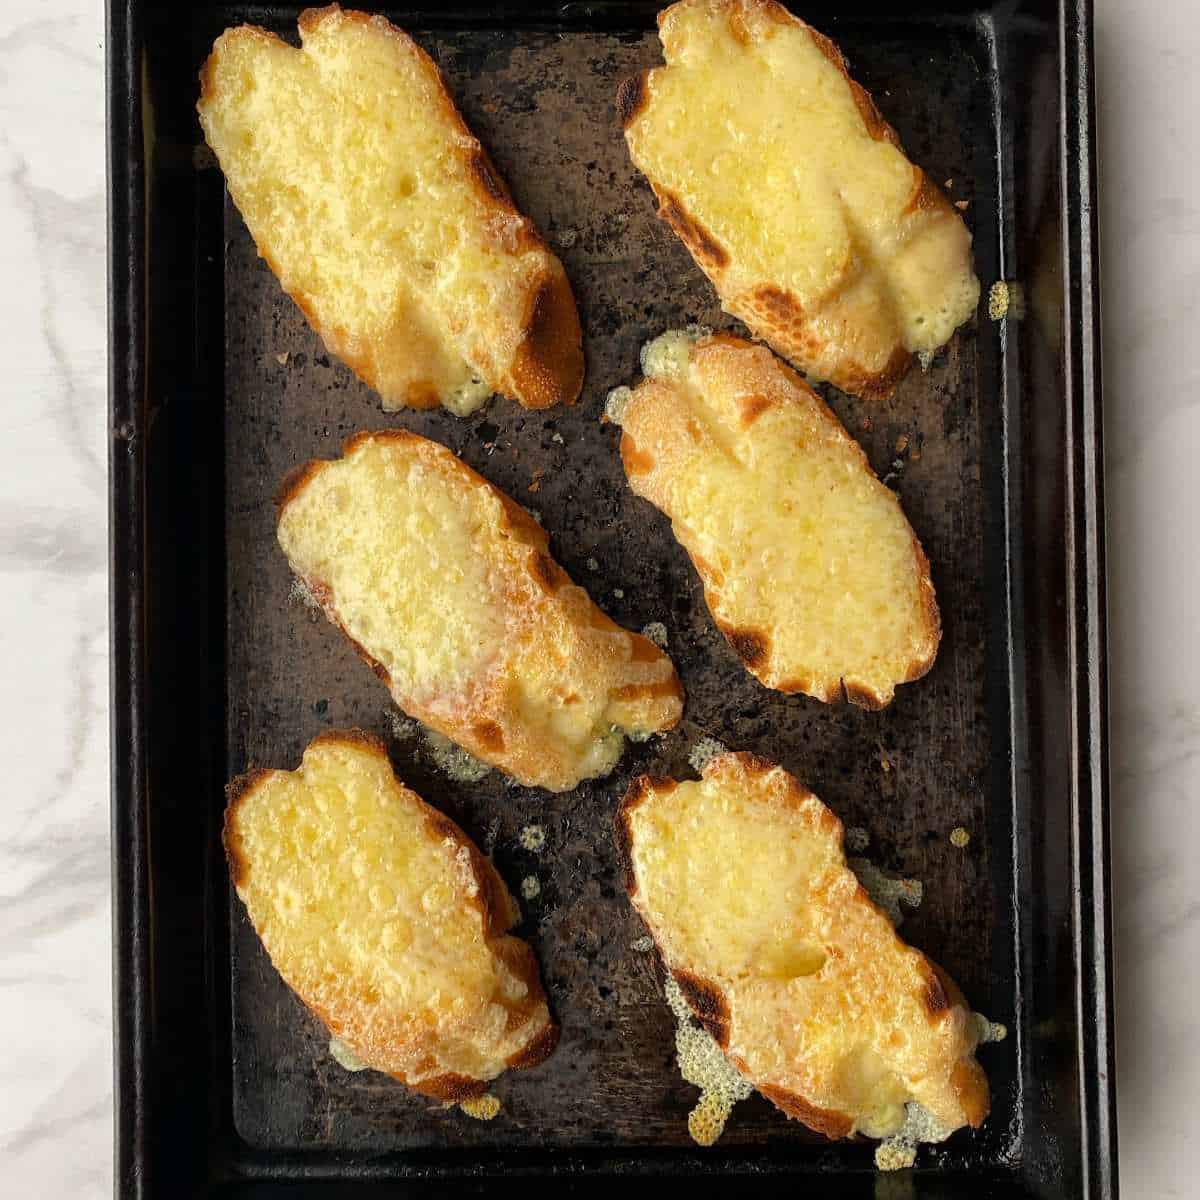 Grilled French stick slices with melted grated cheese on top